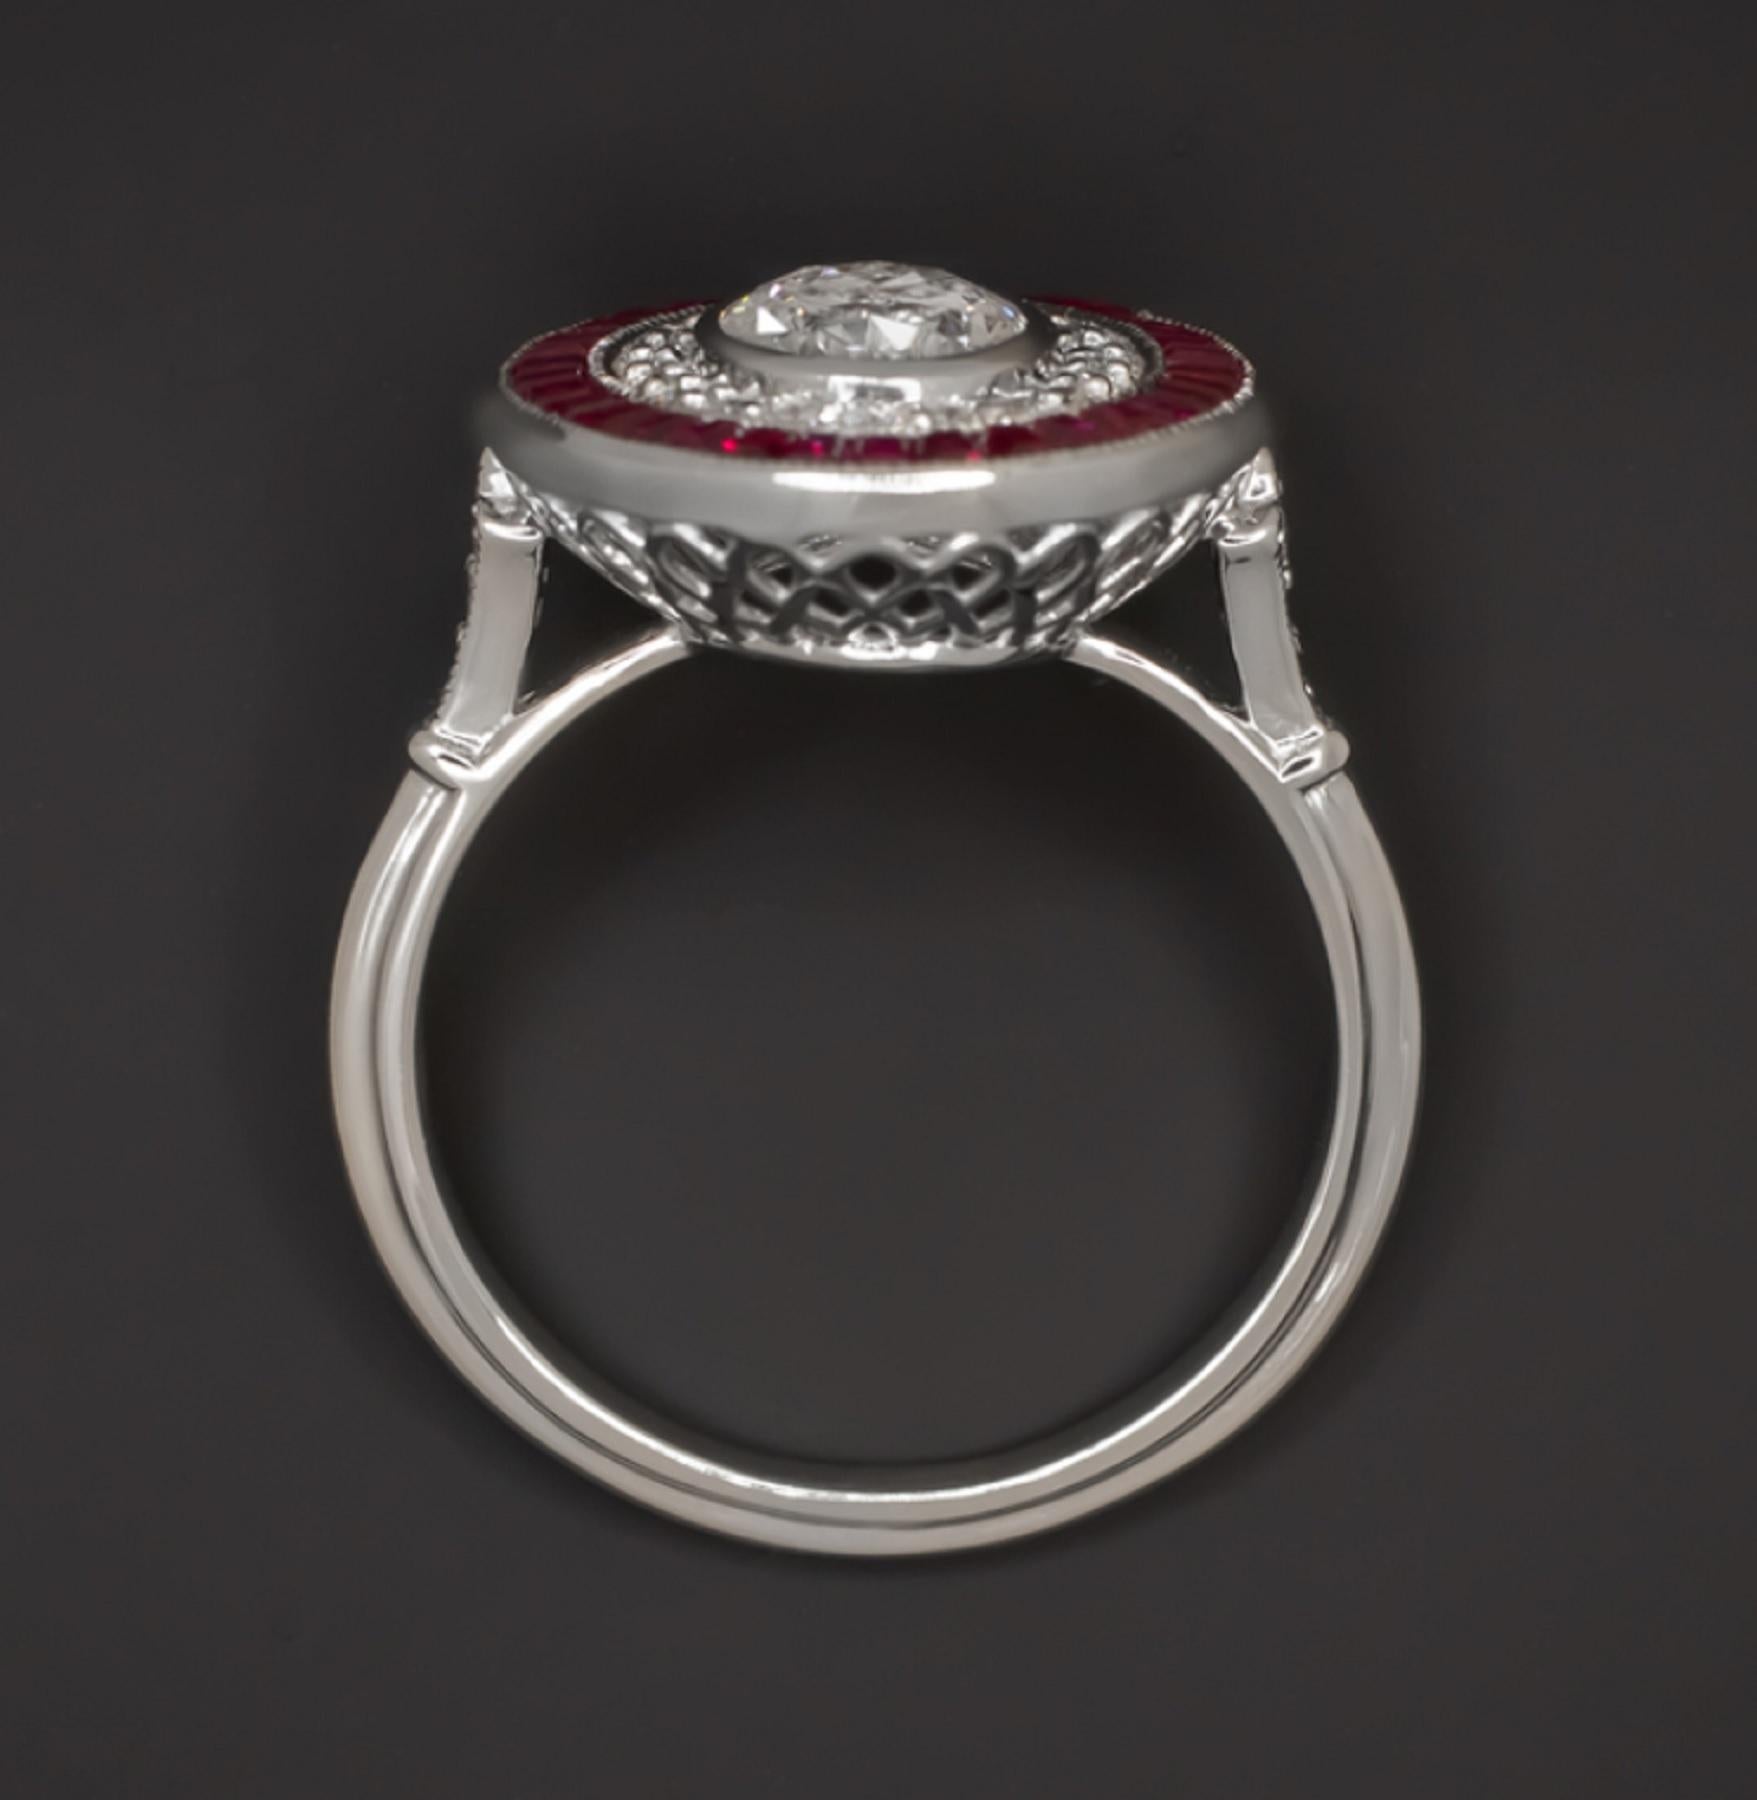 An important ring boasts a one carat perfectly white oval diamond surrounded by a double halo of sparkling diamonds and custom cut rich red rubies. 

The red of the natural rubies creates an eye-catching contrast with the bright white of the